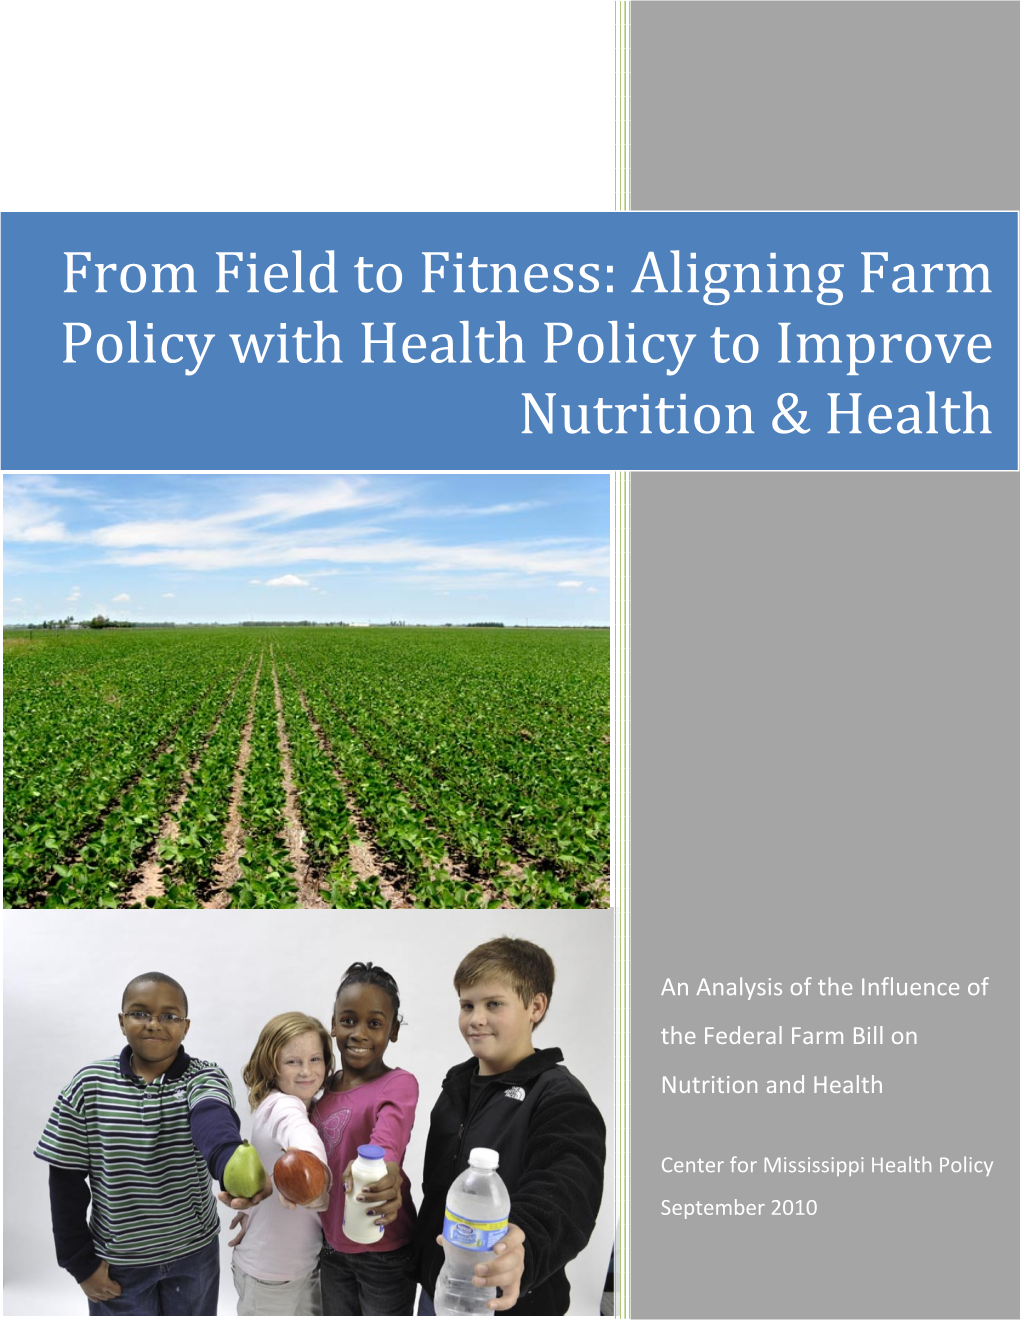 Aligning Farm Policy with Health Policy to Improve Nutrition & Health